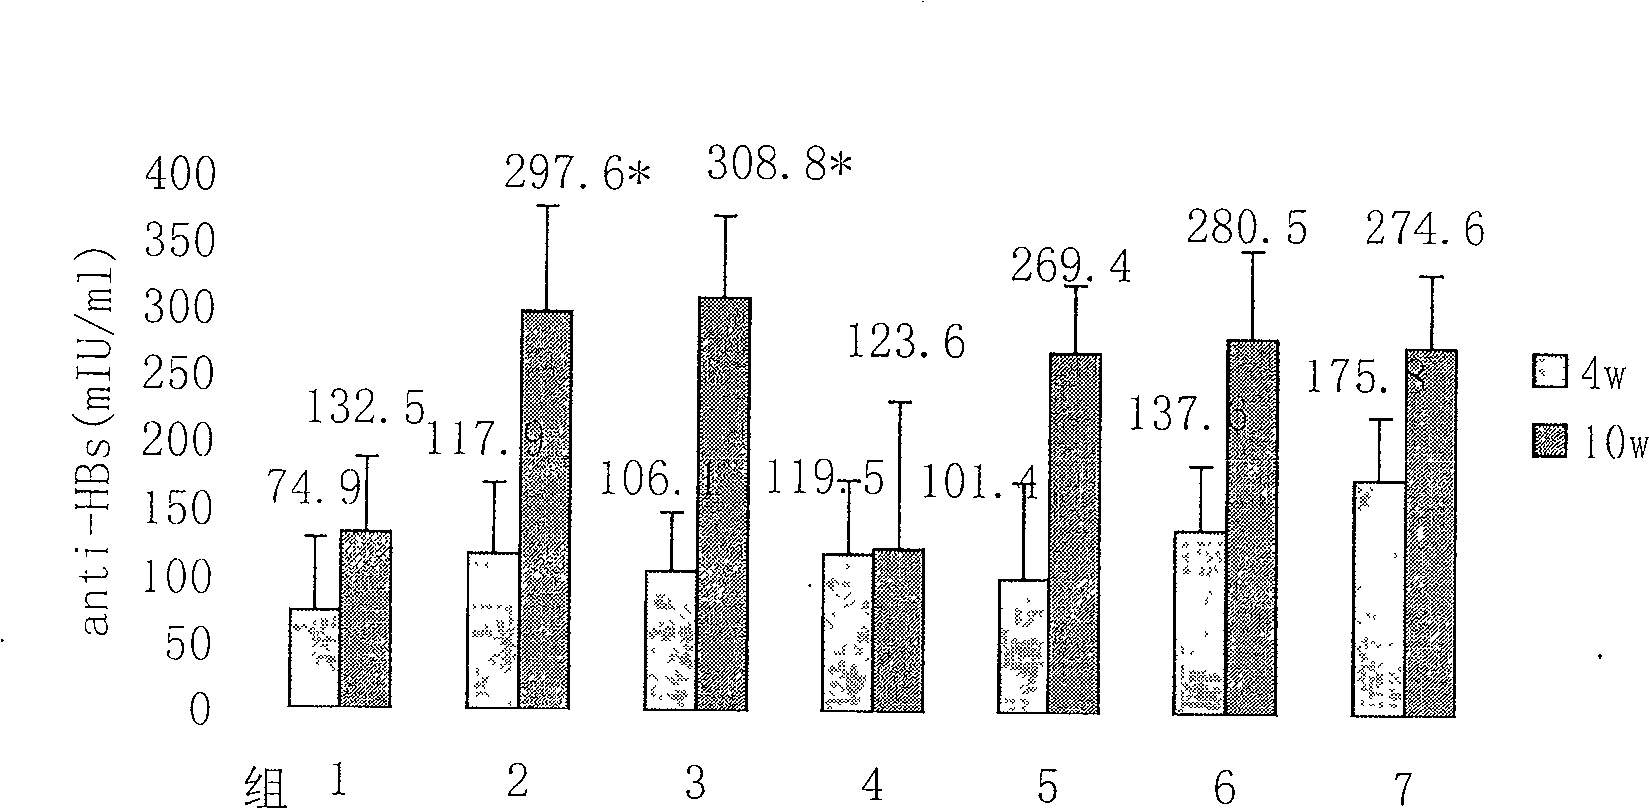 Unmethylated CpG dinucleotide content detection method